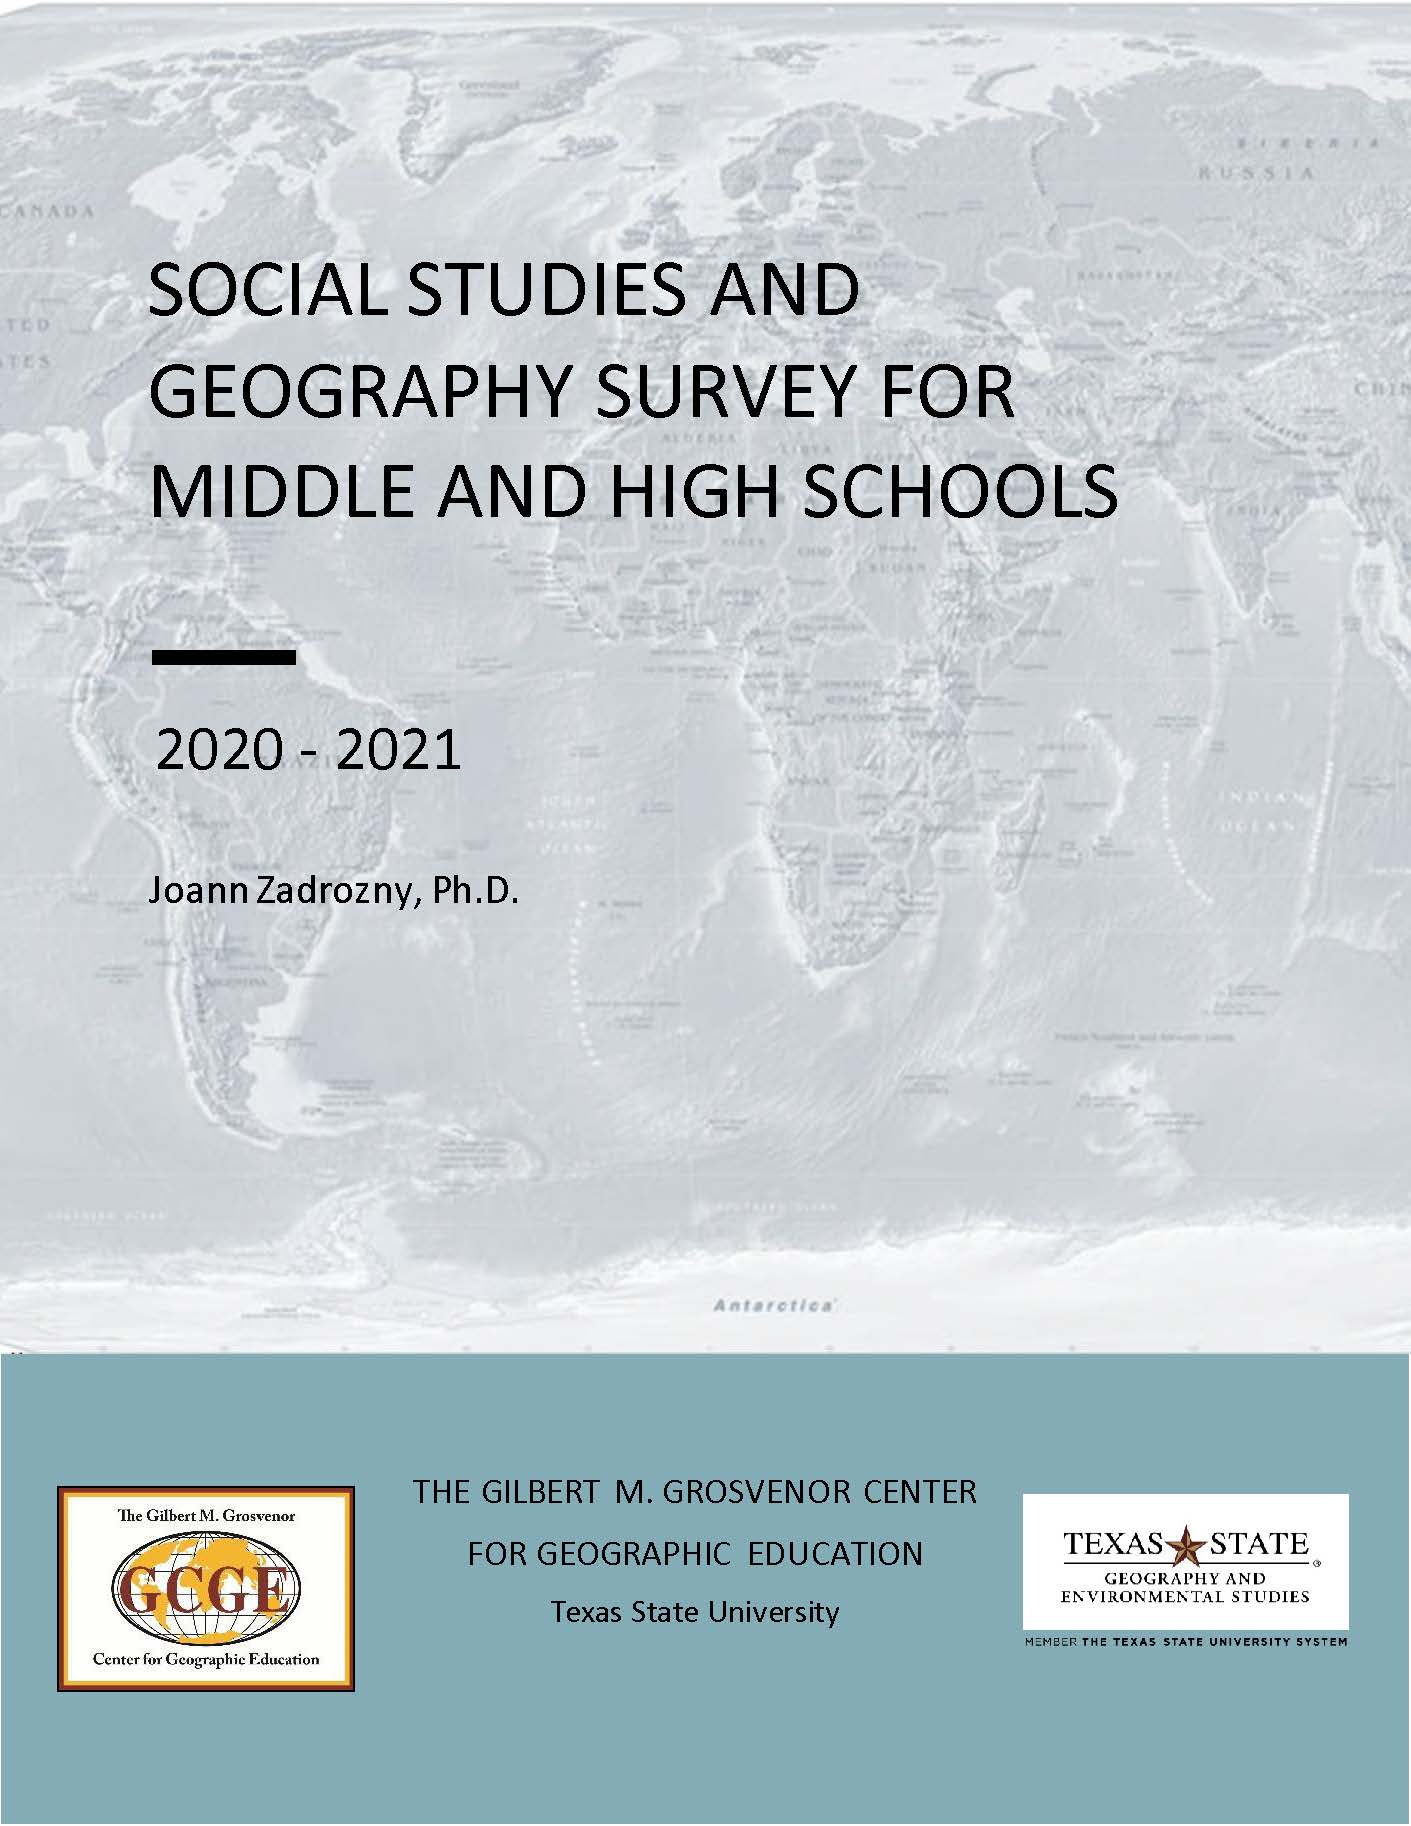 Middle and High School Social Studies Survey 2020-2021